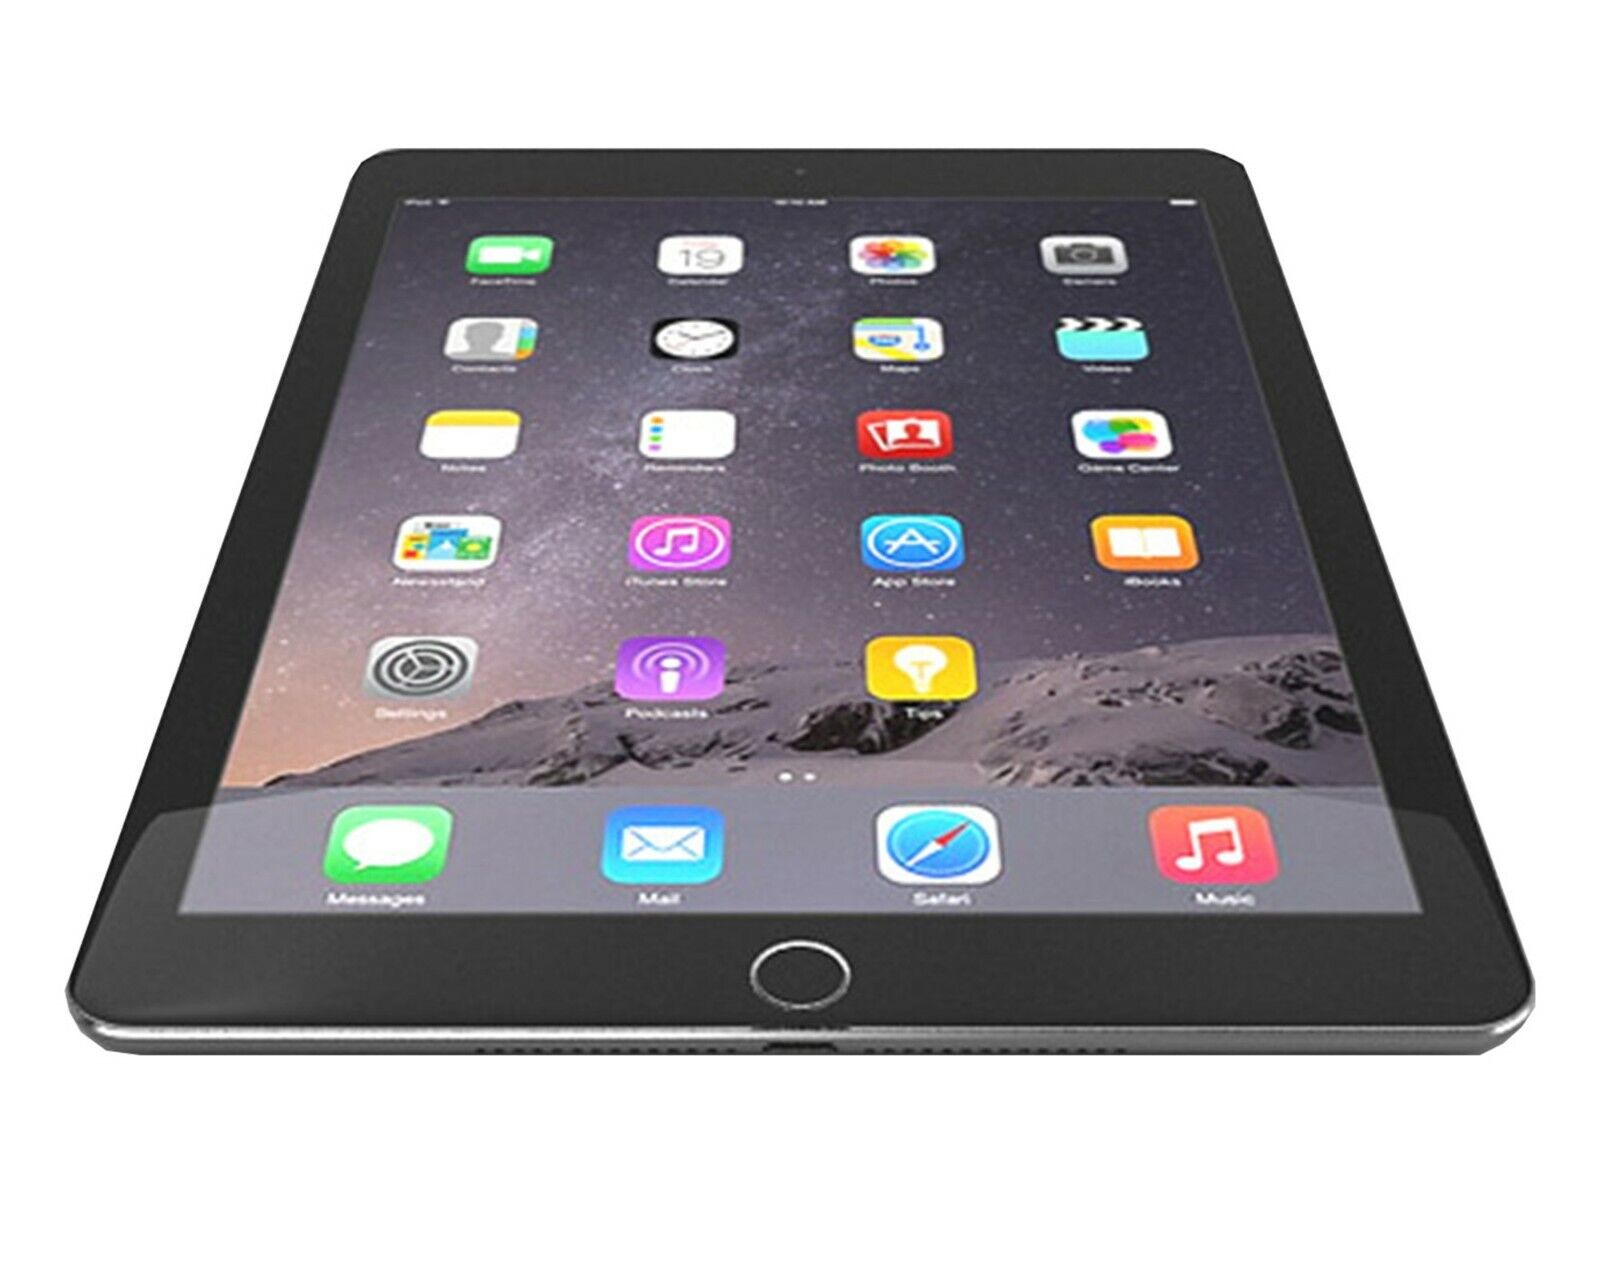 Apple iPad Air 2, 16GB, Space Gray, Wi-Fi Only, Original Box and Bundle  Offer | eBay